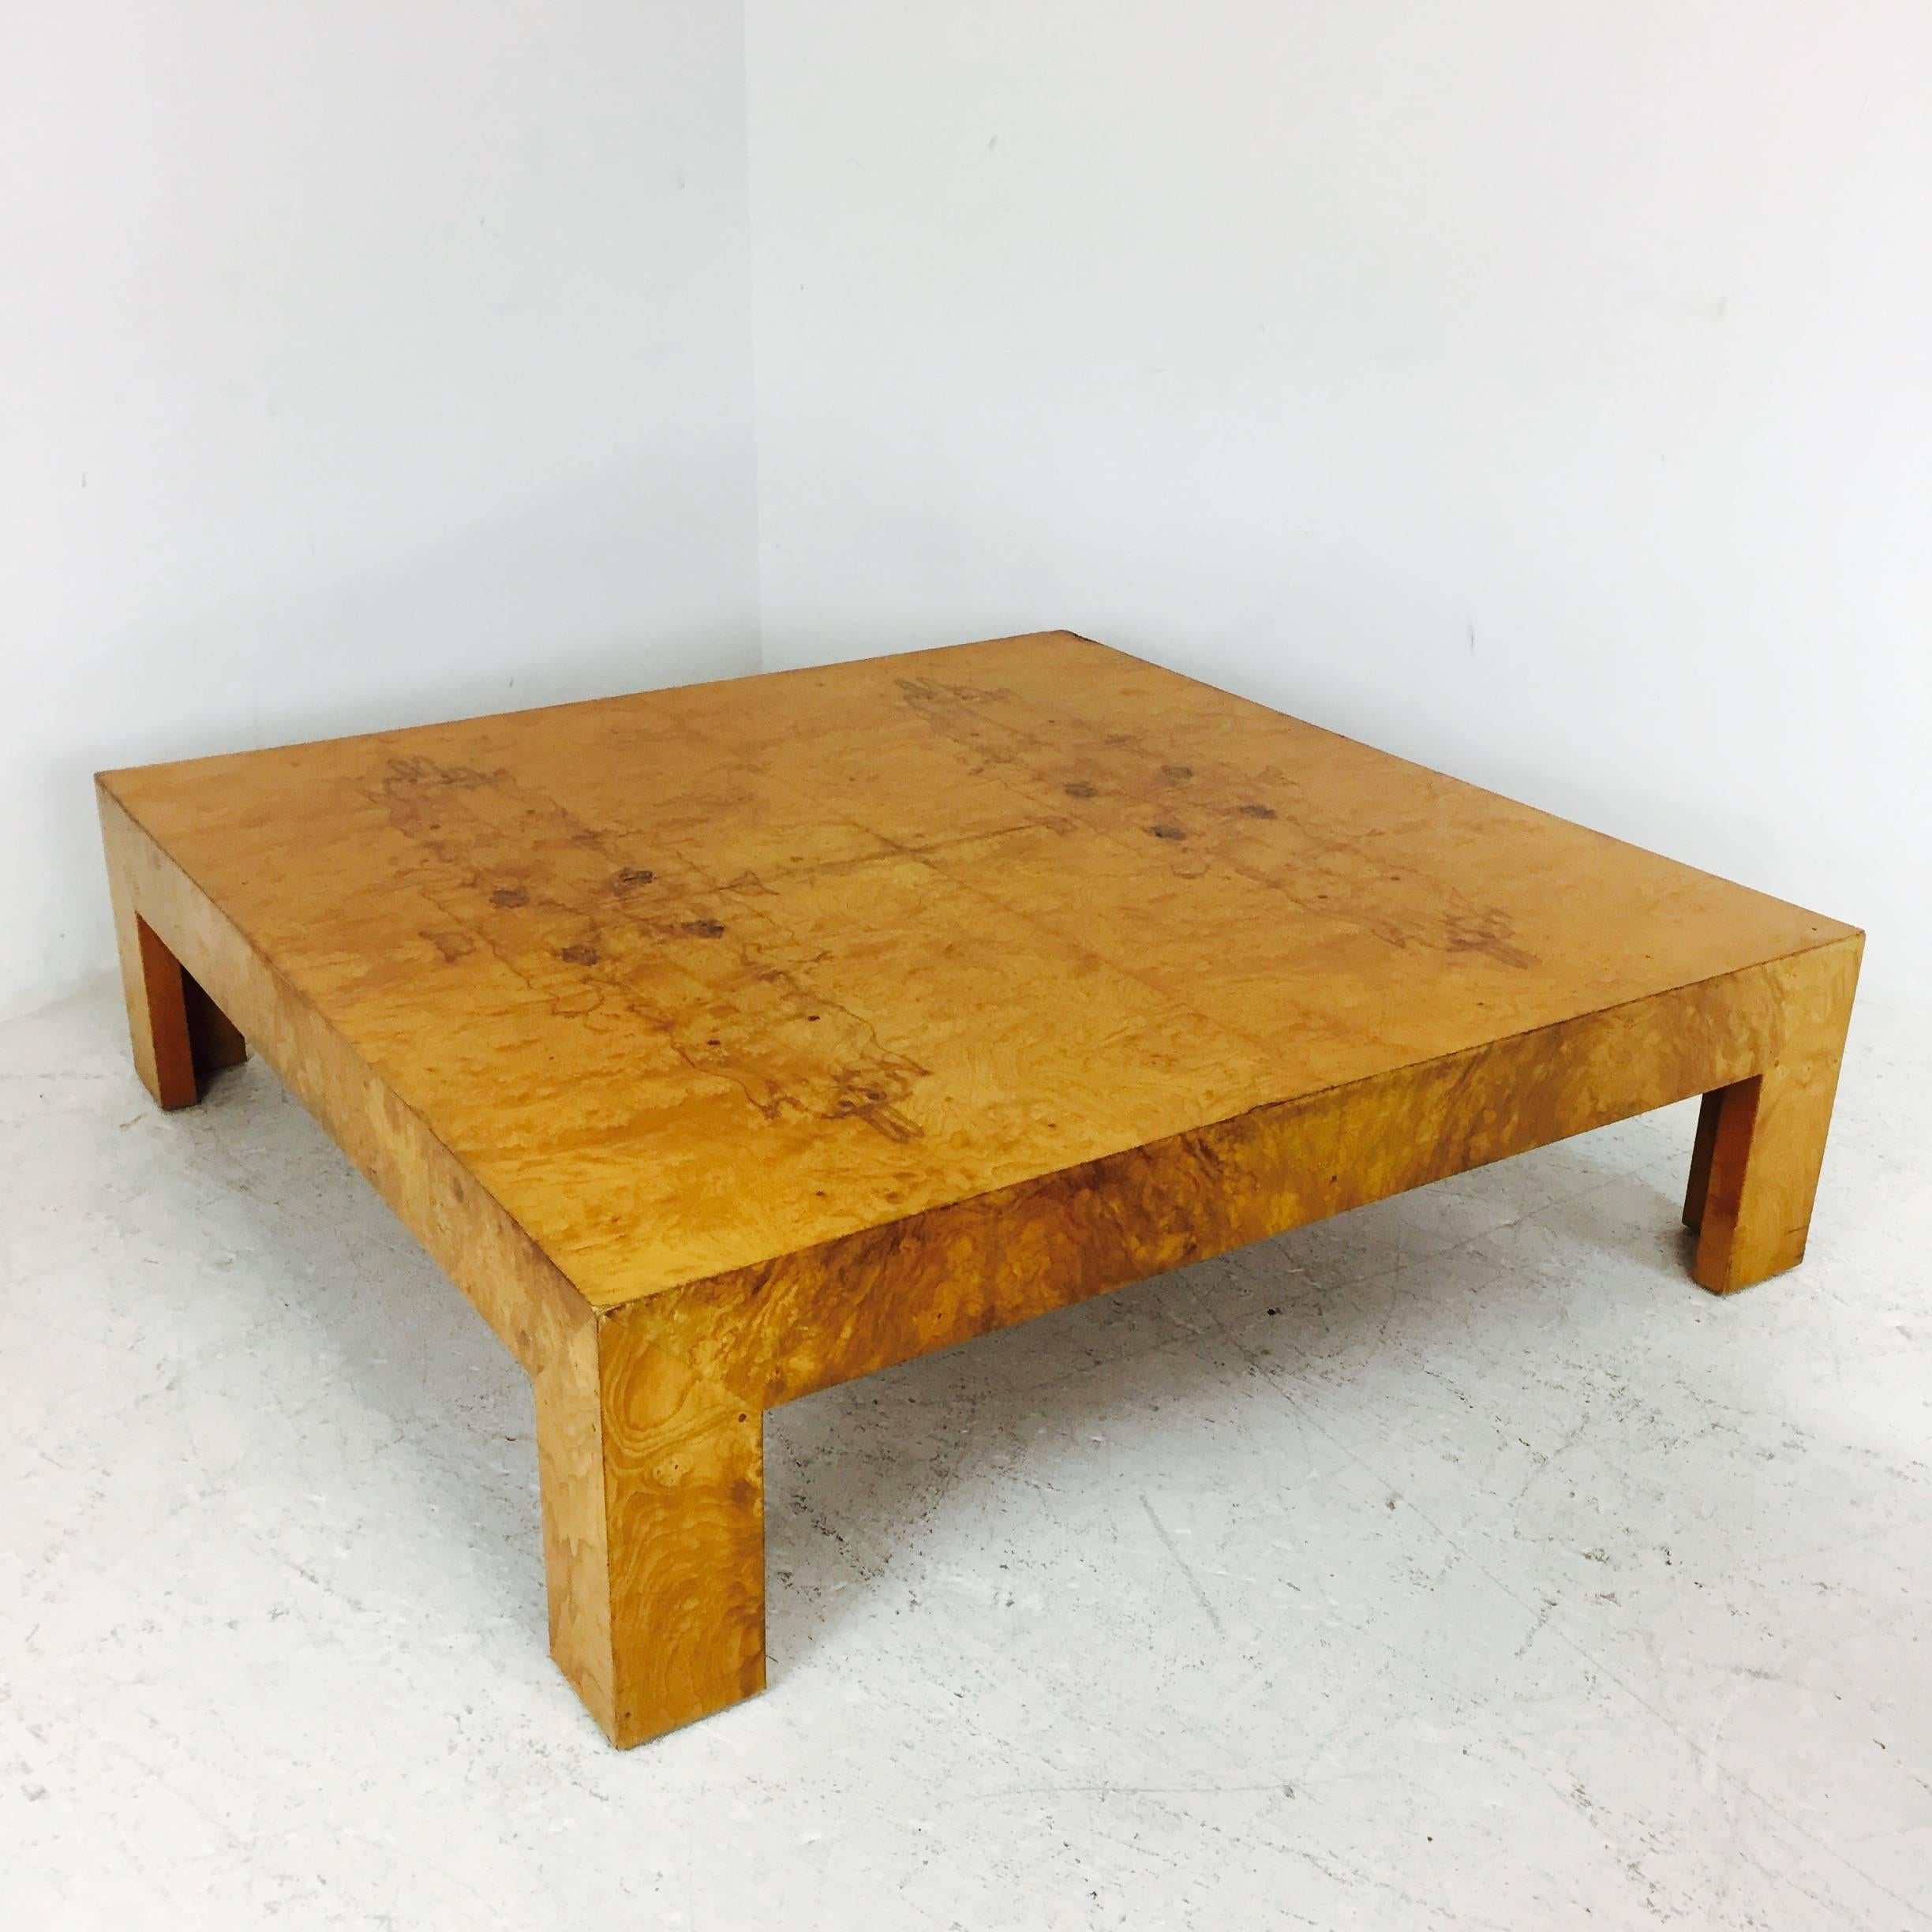 Milo Baughman burl wood coffee table with beautiful matchbook burl veneers. Has recently been refinished. Labeled, circa 1970s

dimensions: 54" wide 54" deep 15" tall.